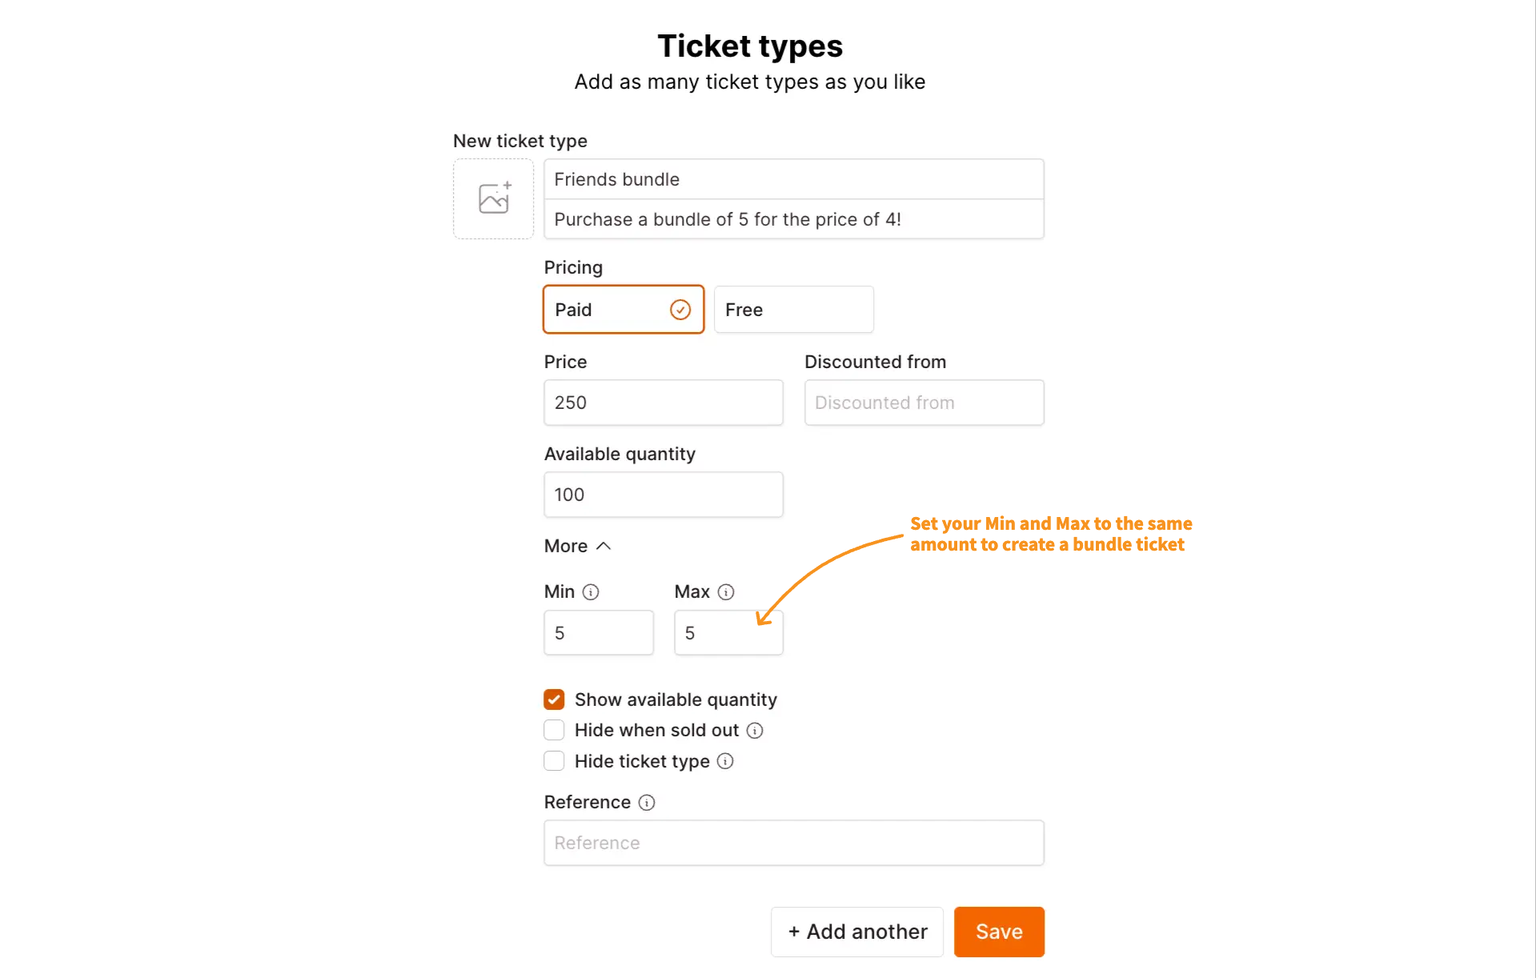 Set your Min and Max to the same amount to create a bundle ticket